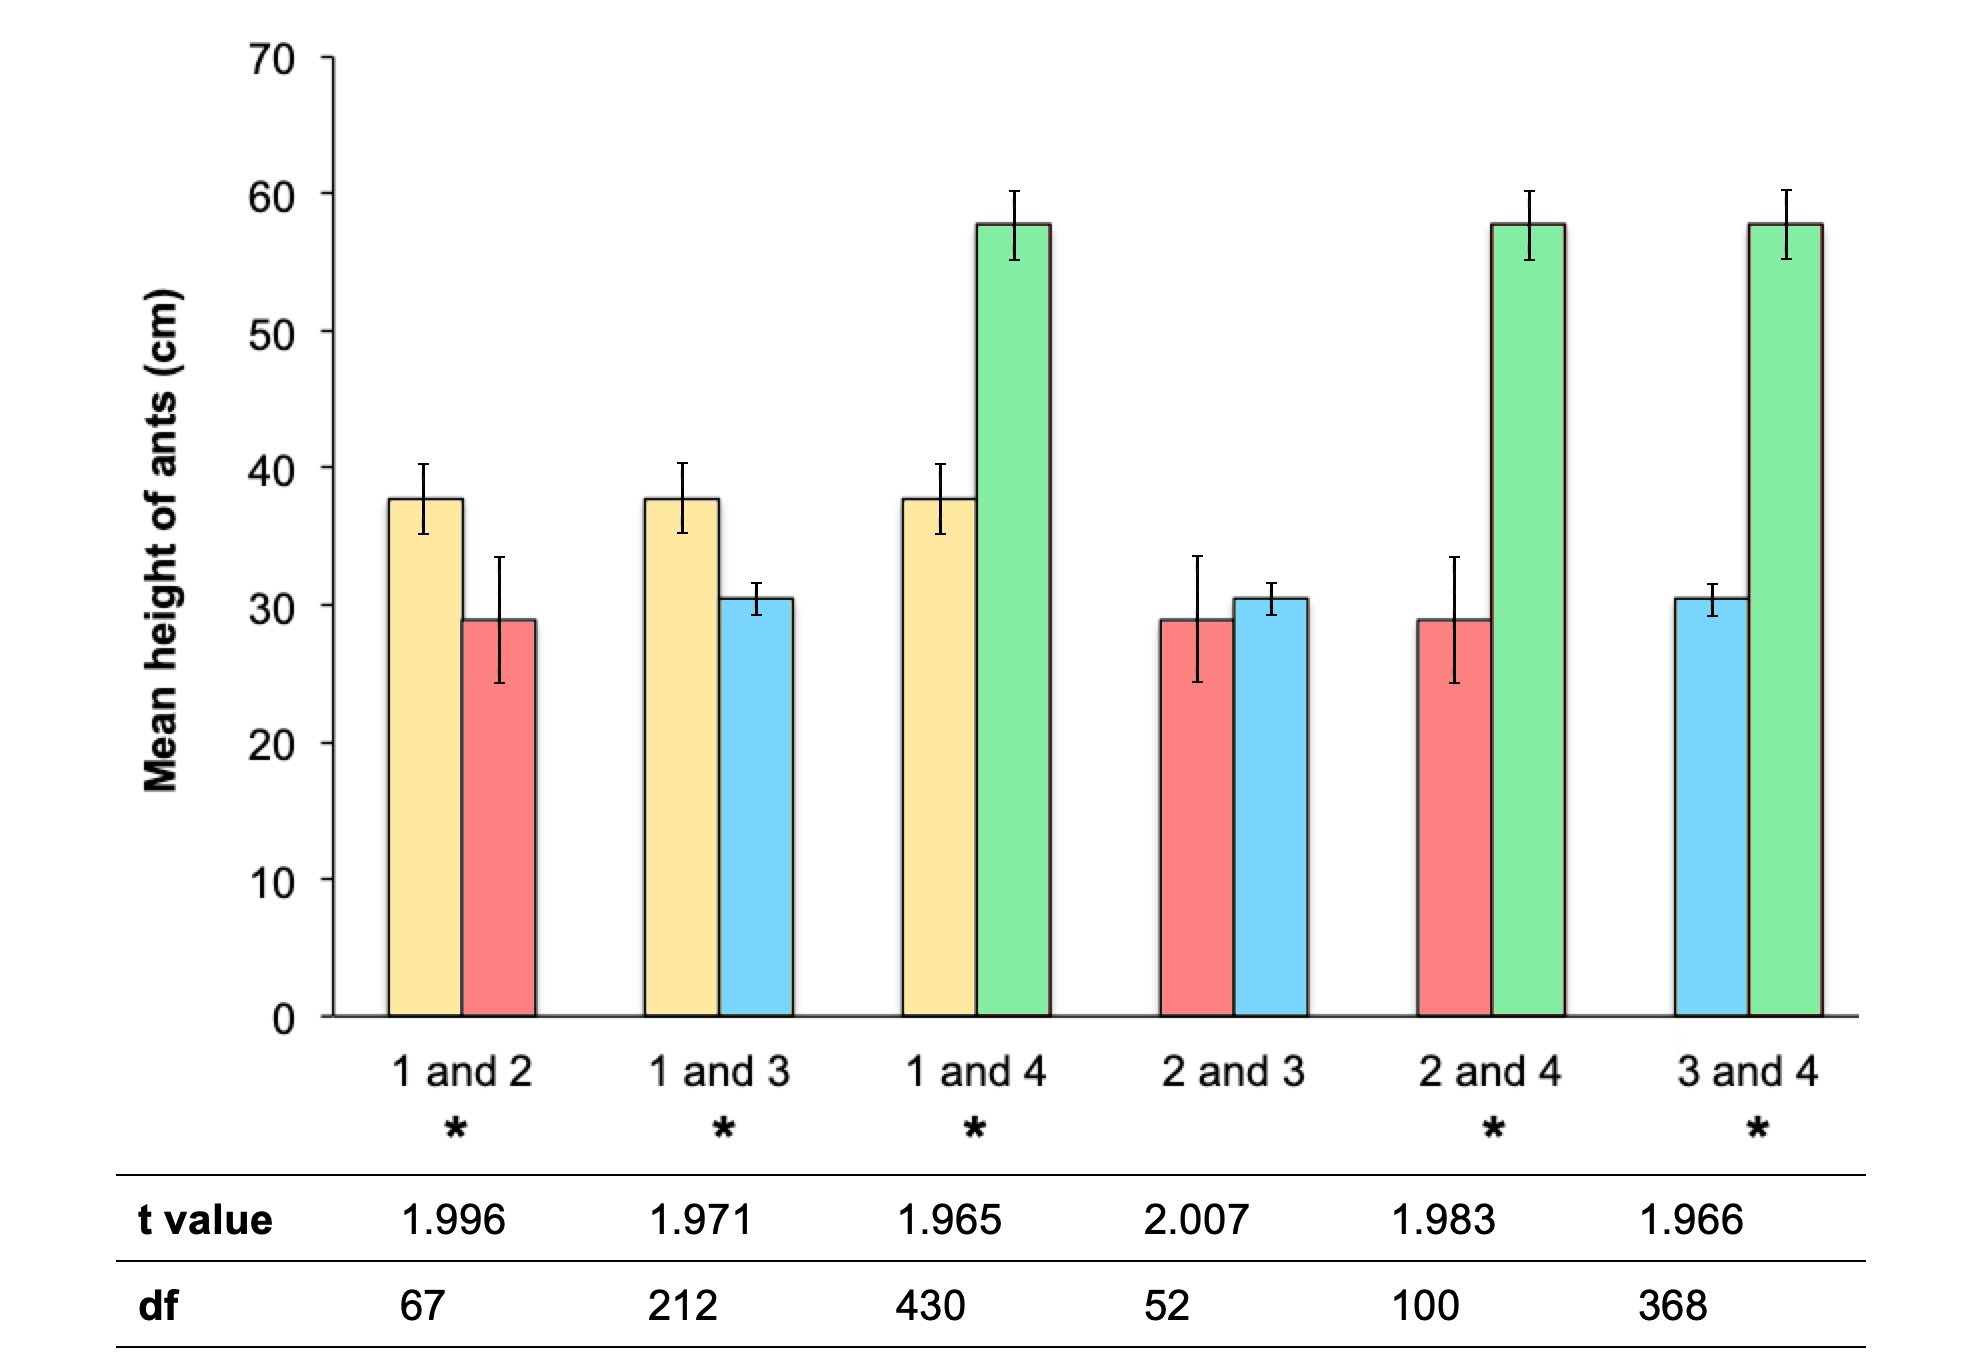 Figure 3: MT-test statistics comparing mean height of zombie ants at four sites in Gunung Mulu National Park. Significant level set at p < 0.05. Statistical significance indicated by *. Site 1 = yellow, Site 2 = red, Site 3 = blue, Site 4 = green